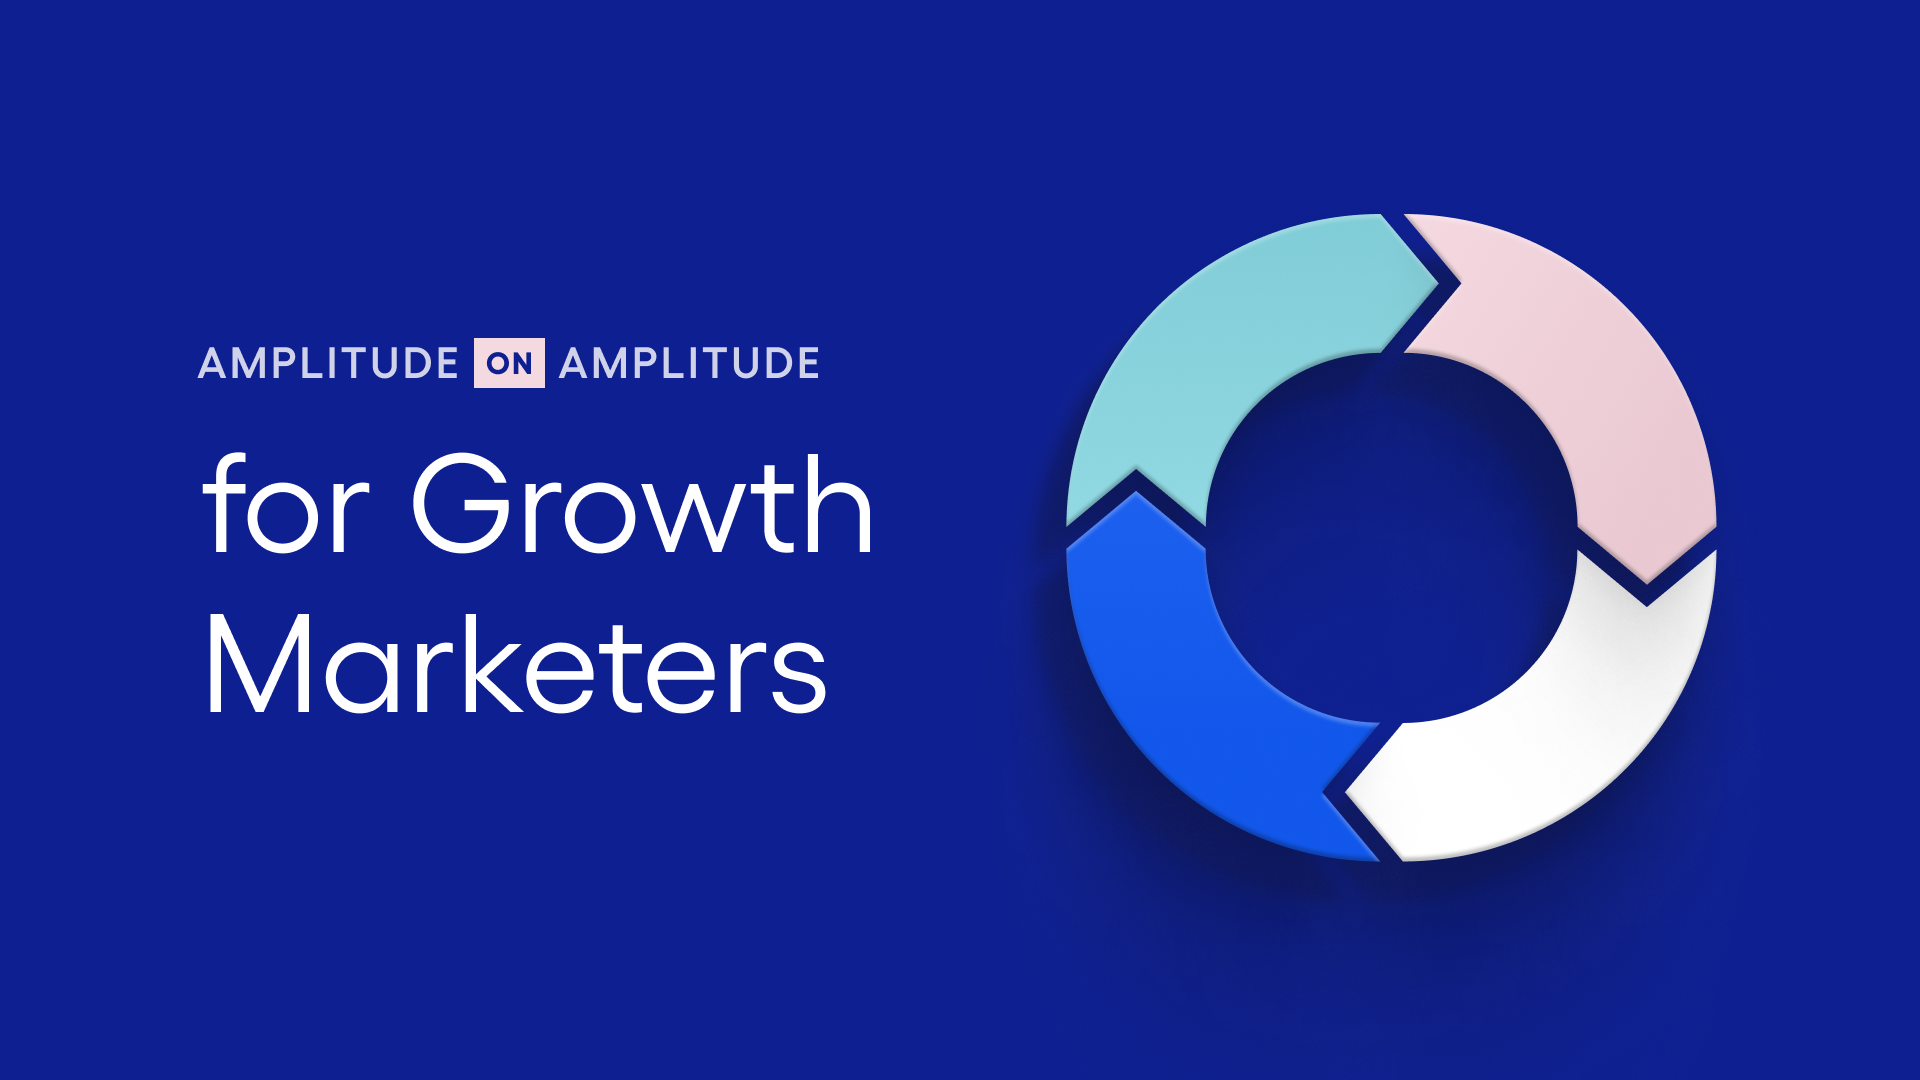 Amplitude for Growth Marketers image with lifecycle circle